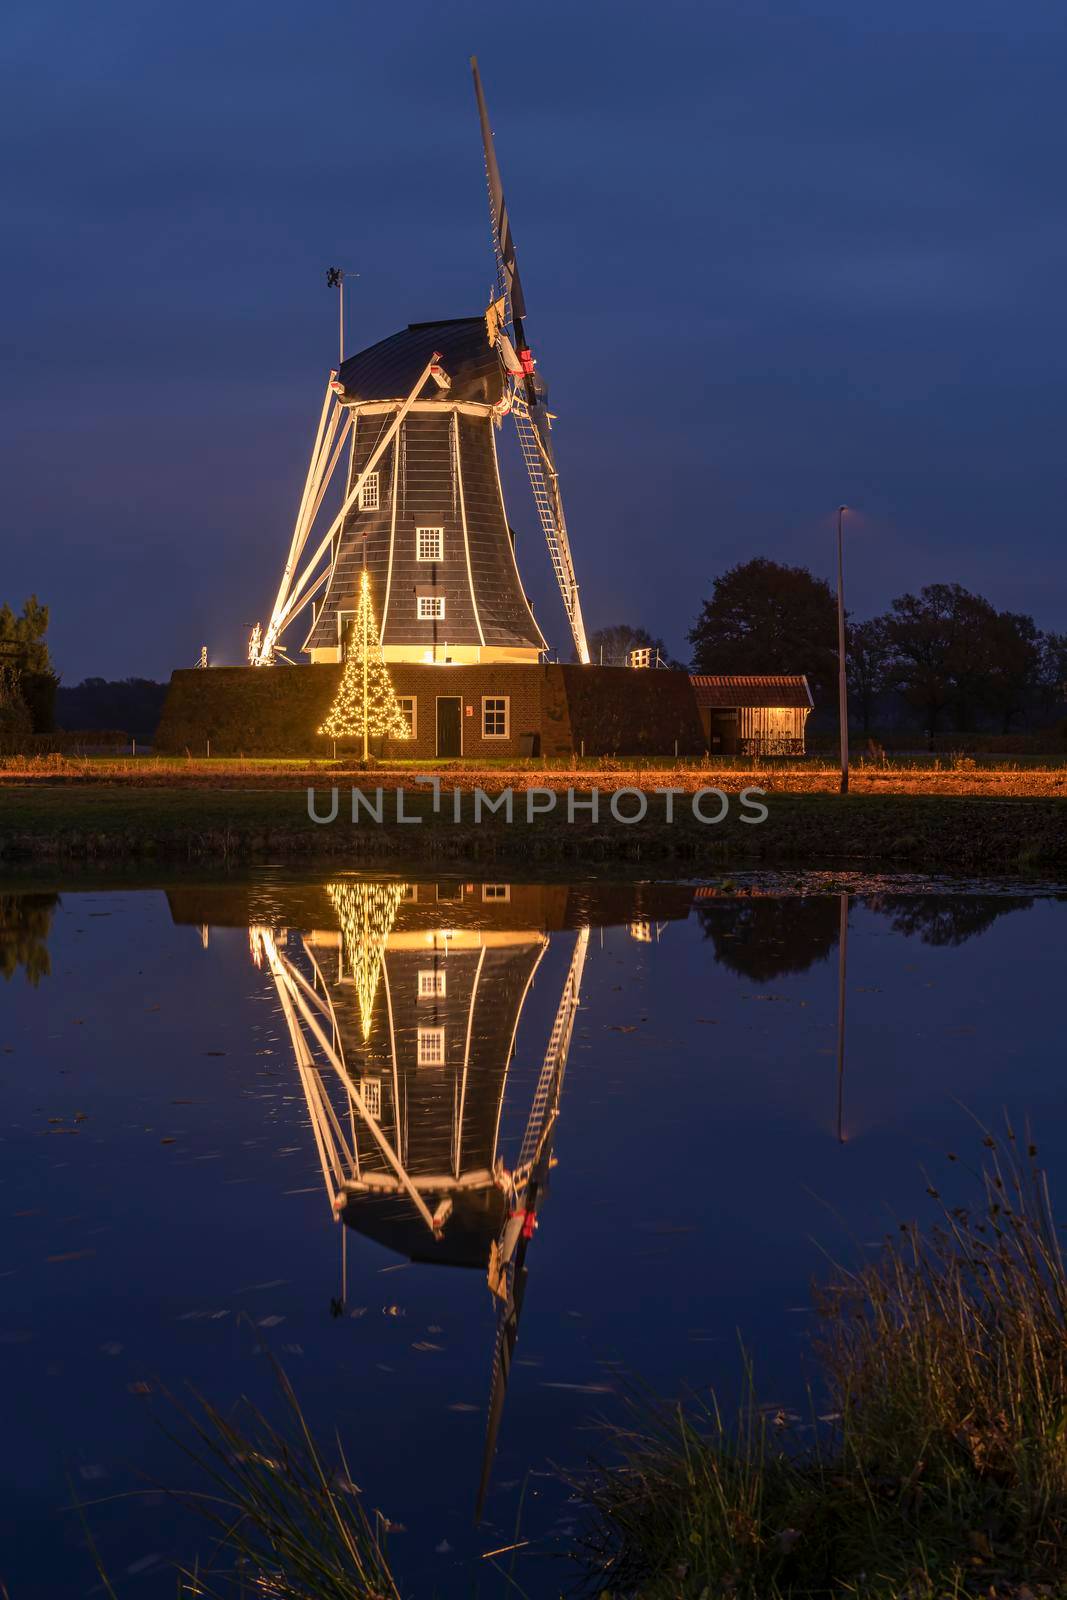 Bataaf windmill in Winterswijk in the Achterhoek in the Netherlands with a Christmas tree and reflection in the pond in front
